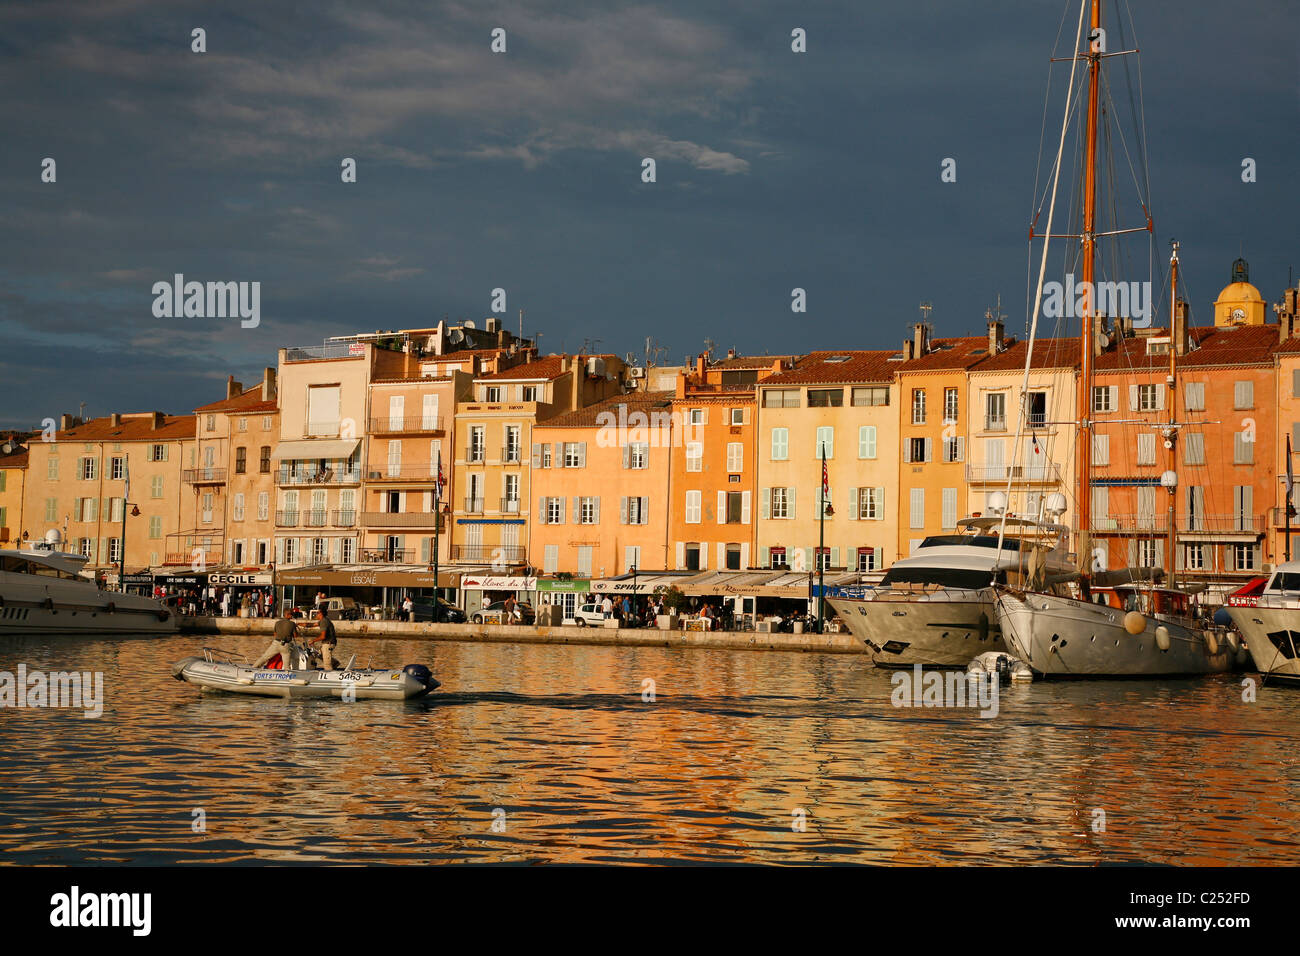 Yachts and boats at the port, St. Tropez, Var, Provence, France. Stock Photo